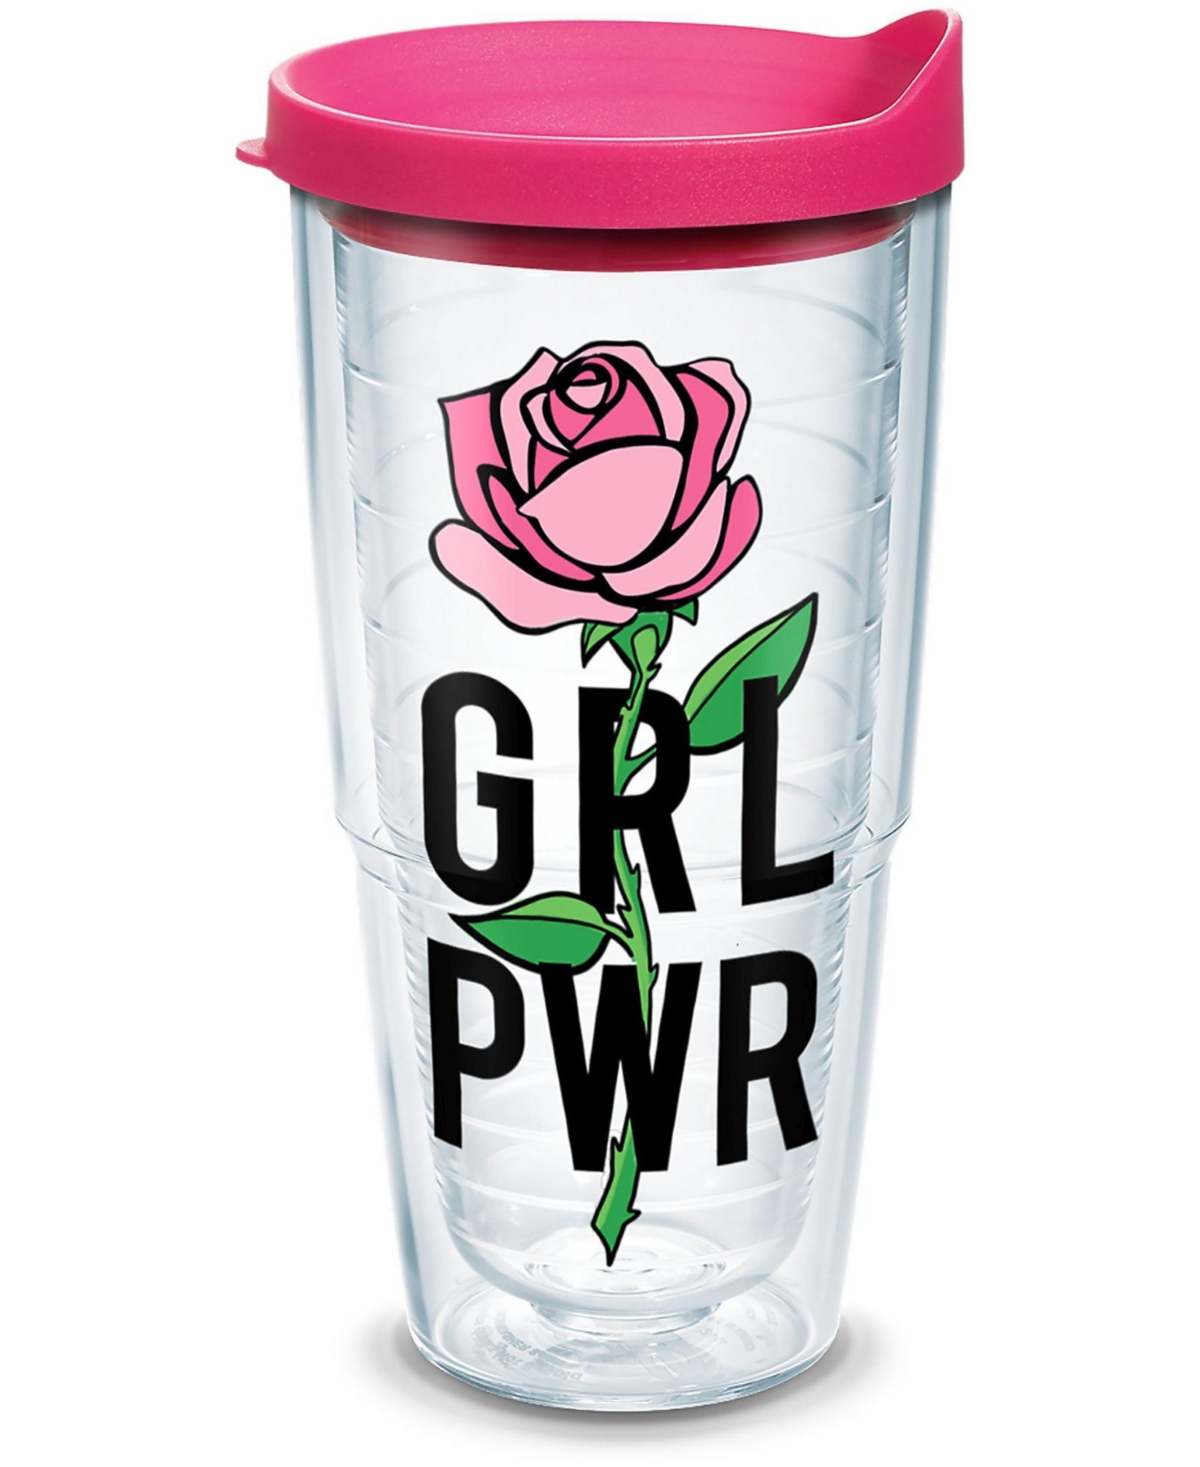 Tervis Tumbler Tervis Girl Power Made In Usa Double Walled Insulated Tumbler Travel Cup Keeps Drinks Cold & Hot, 24 In Open Miscellaneous